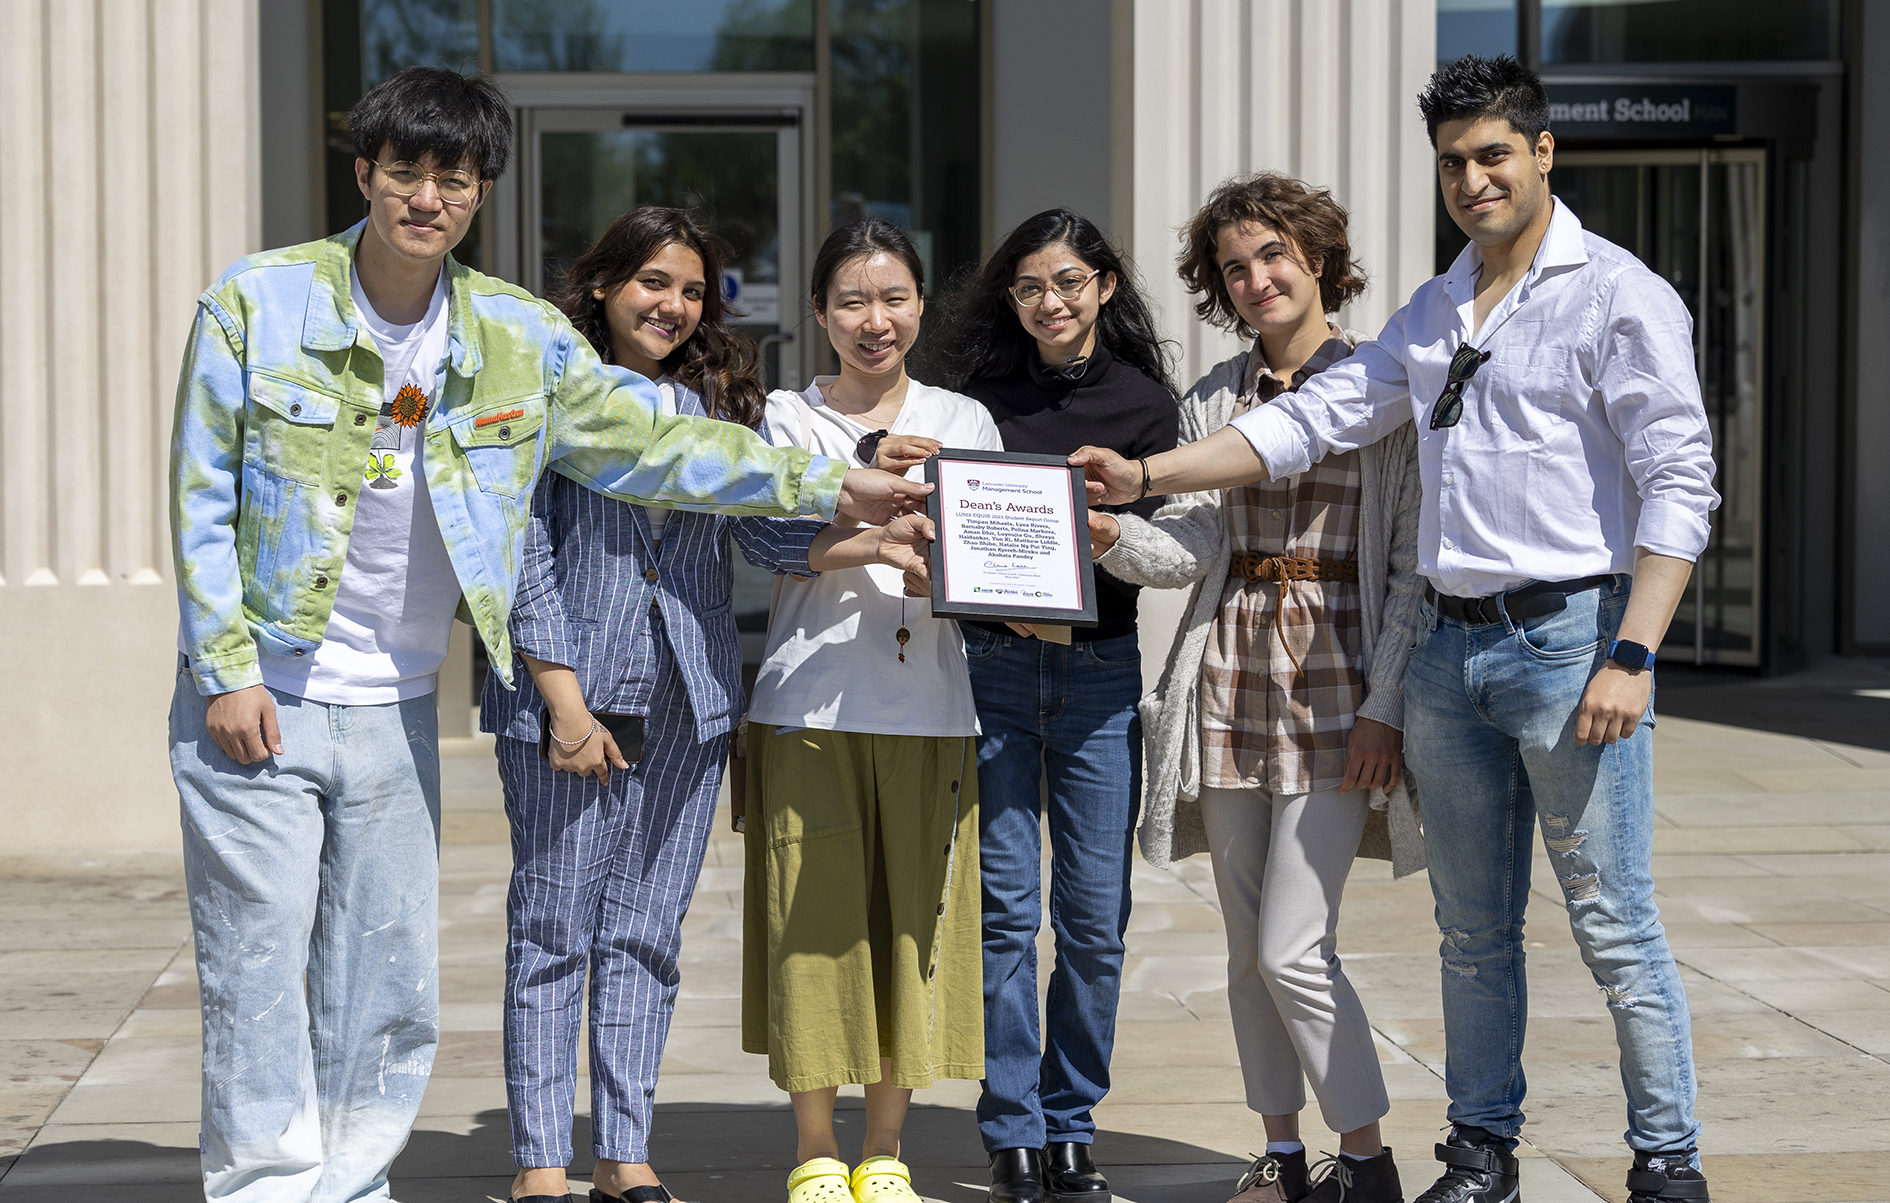 Members of the LUMS EQUIS 2023 Student Report Group hold their LUMS Dean's Award certificate outside the Management School building